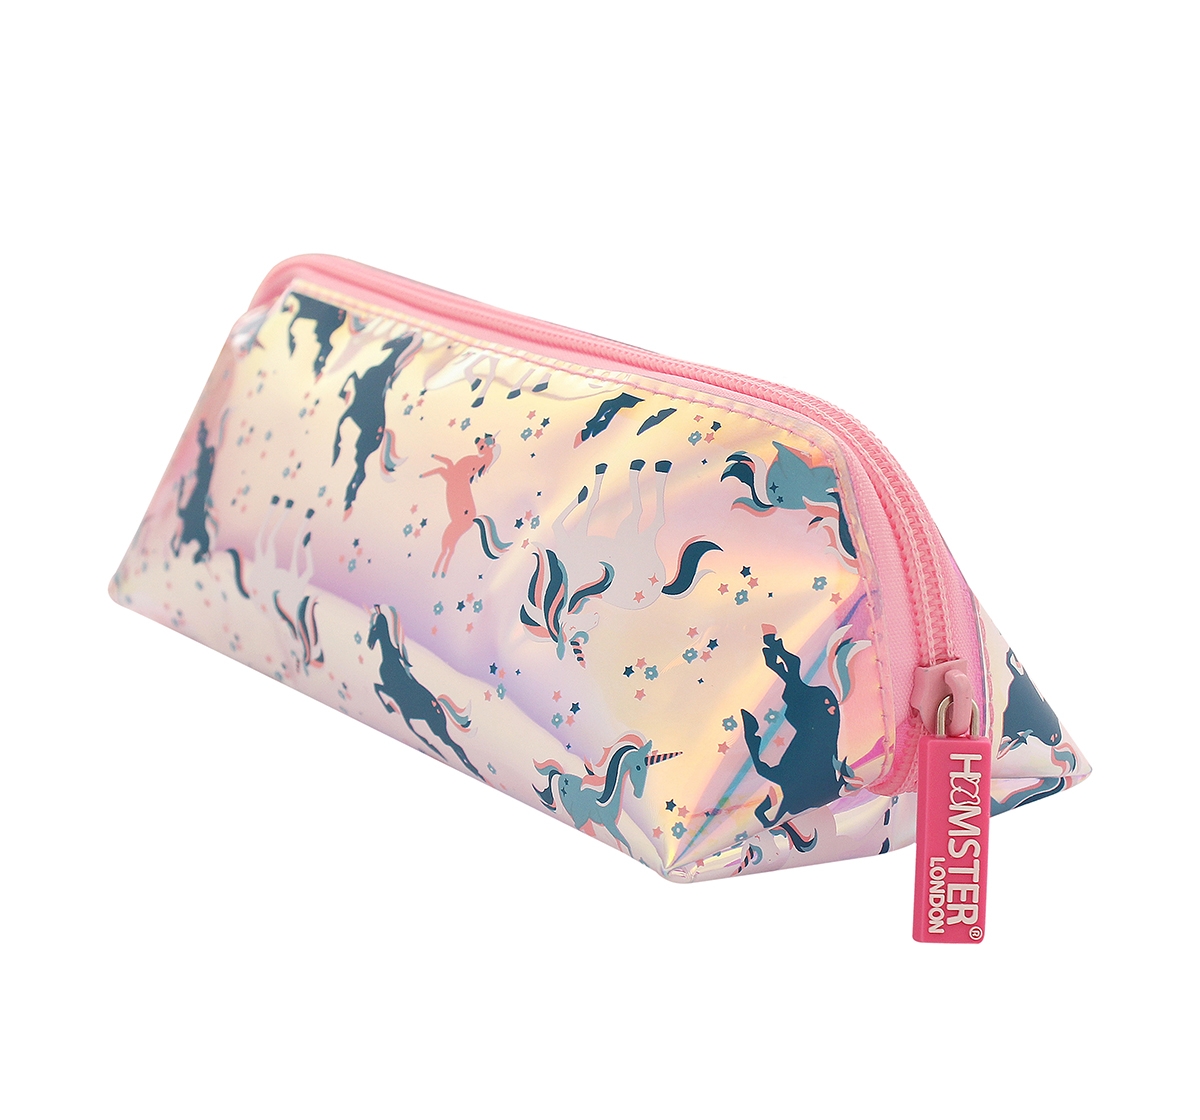 Hamster London | Hamster London Triangular Unicorn Pouch for Girls age 3Y+ (Pink) 1